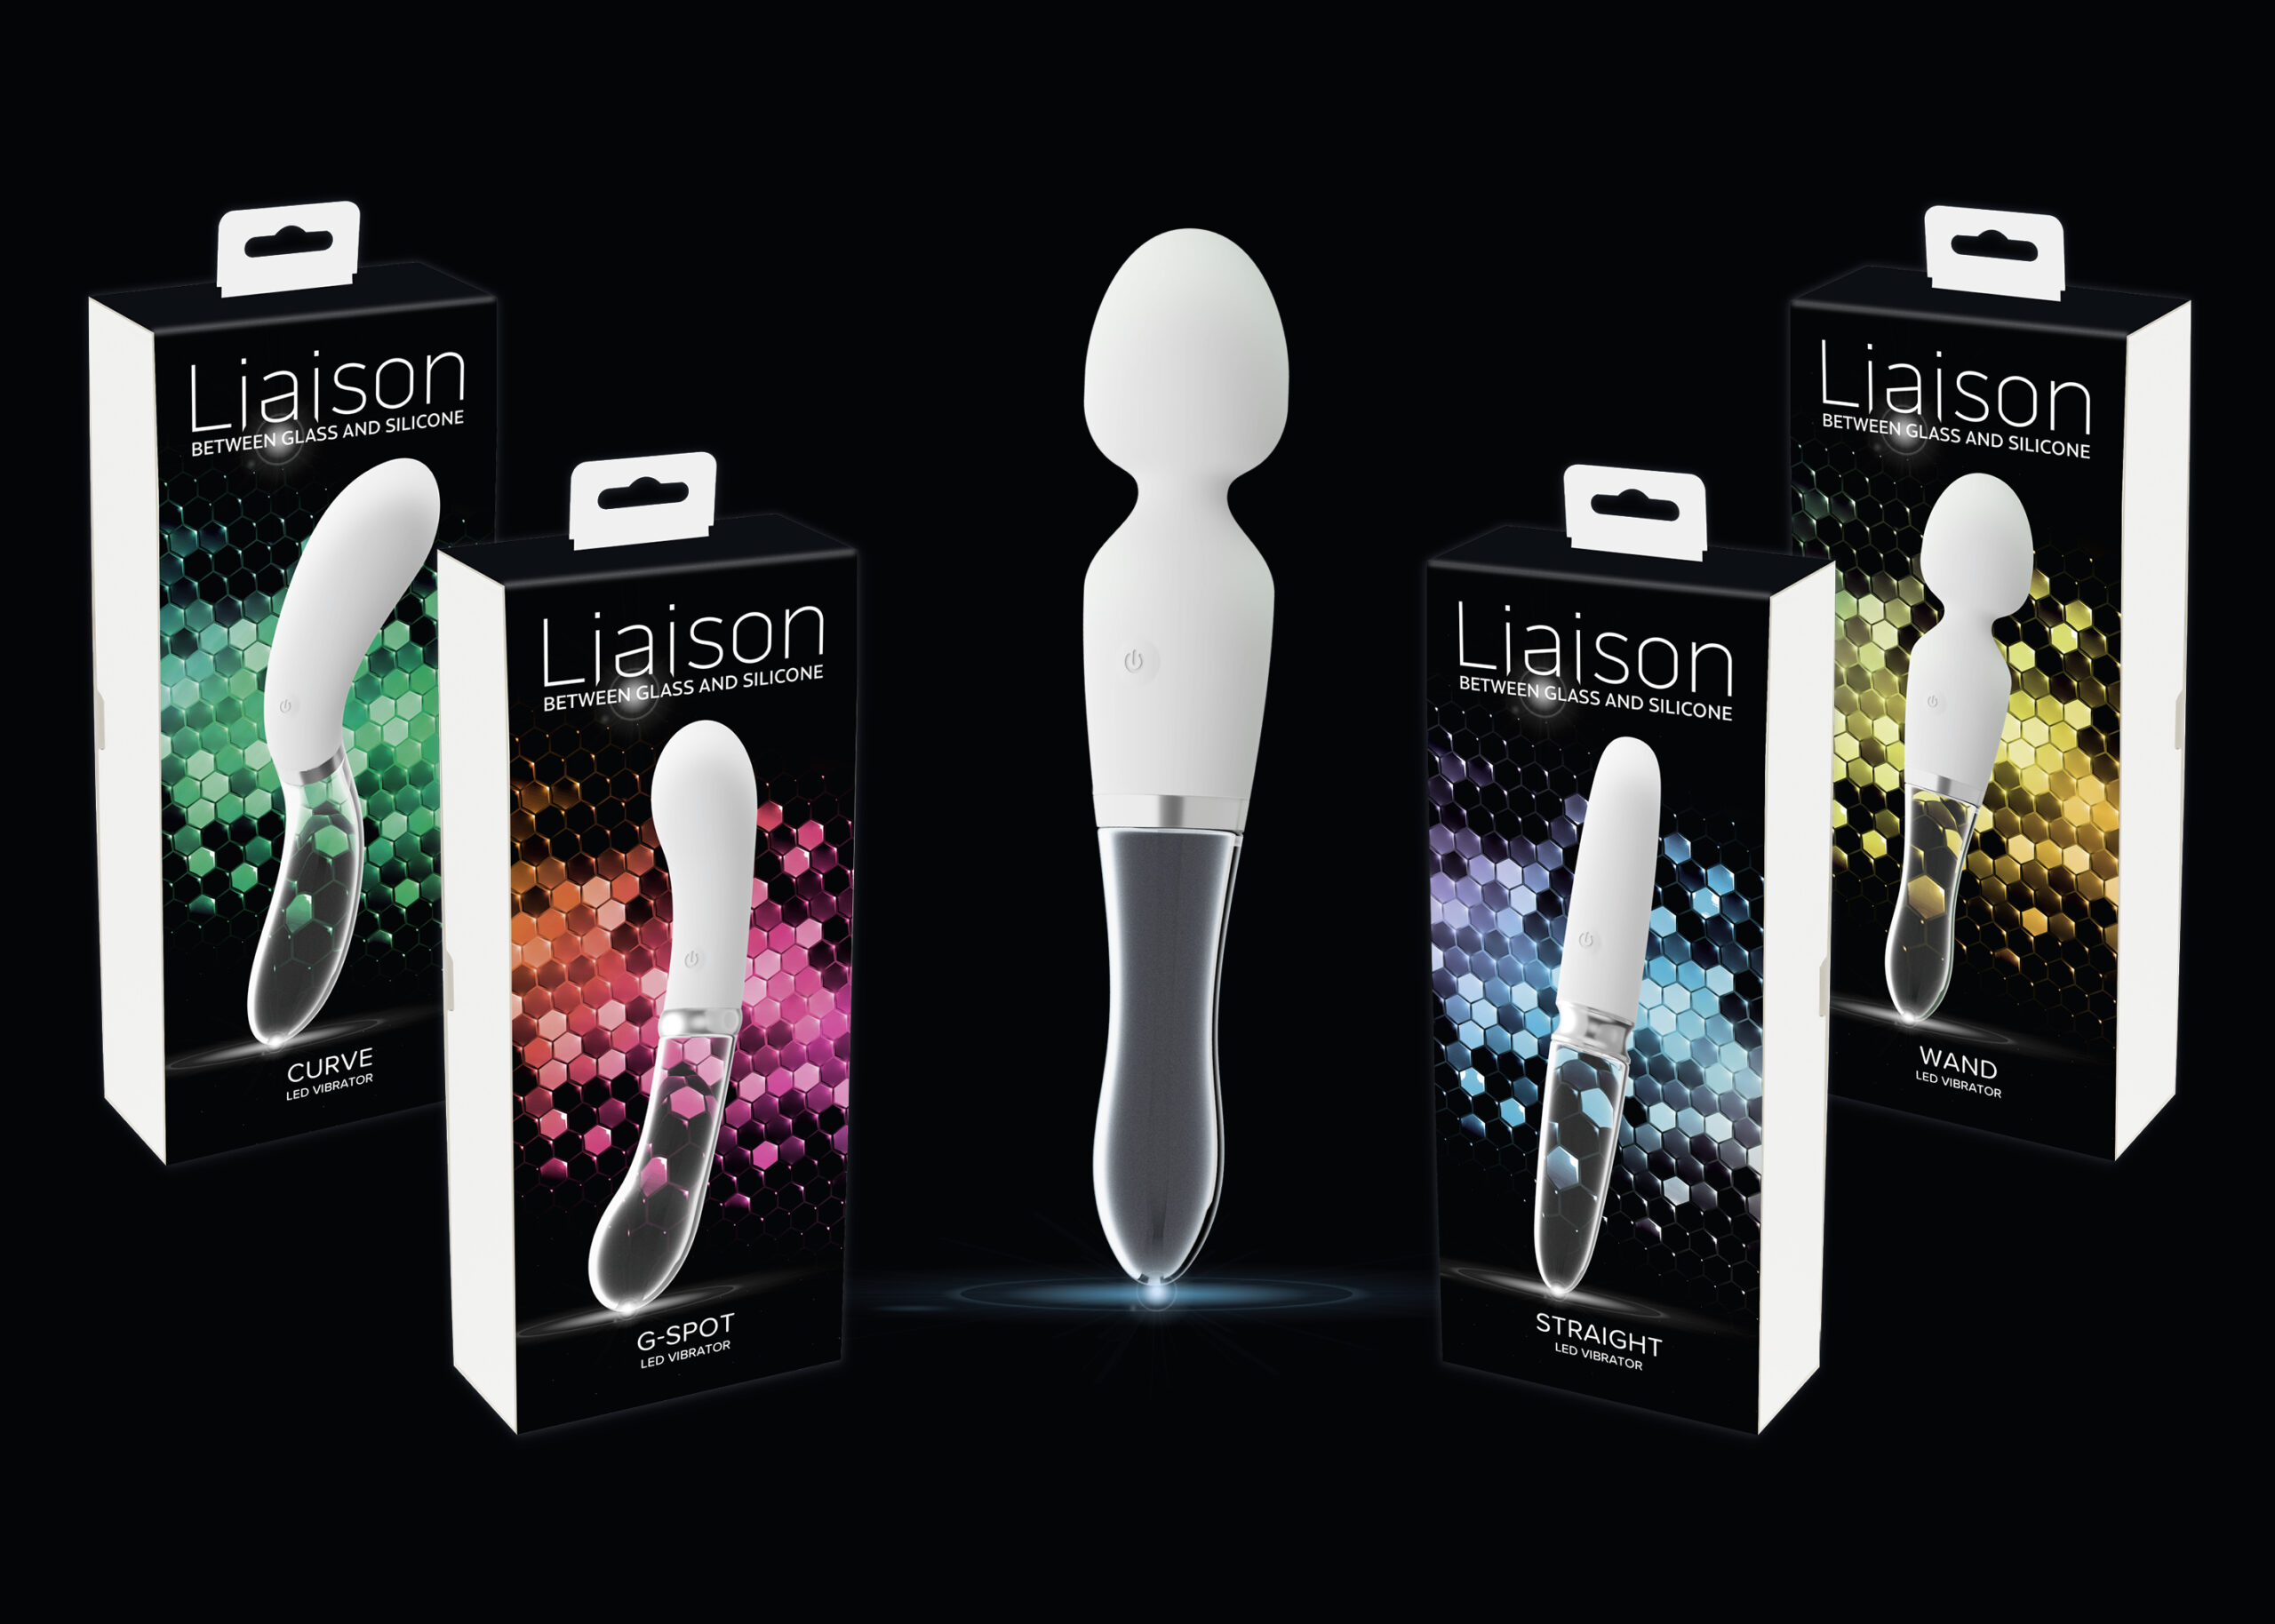 Liaison – Powerful Sex Toys in a Luxurious Design 